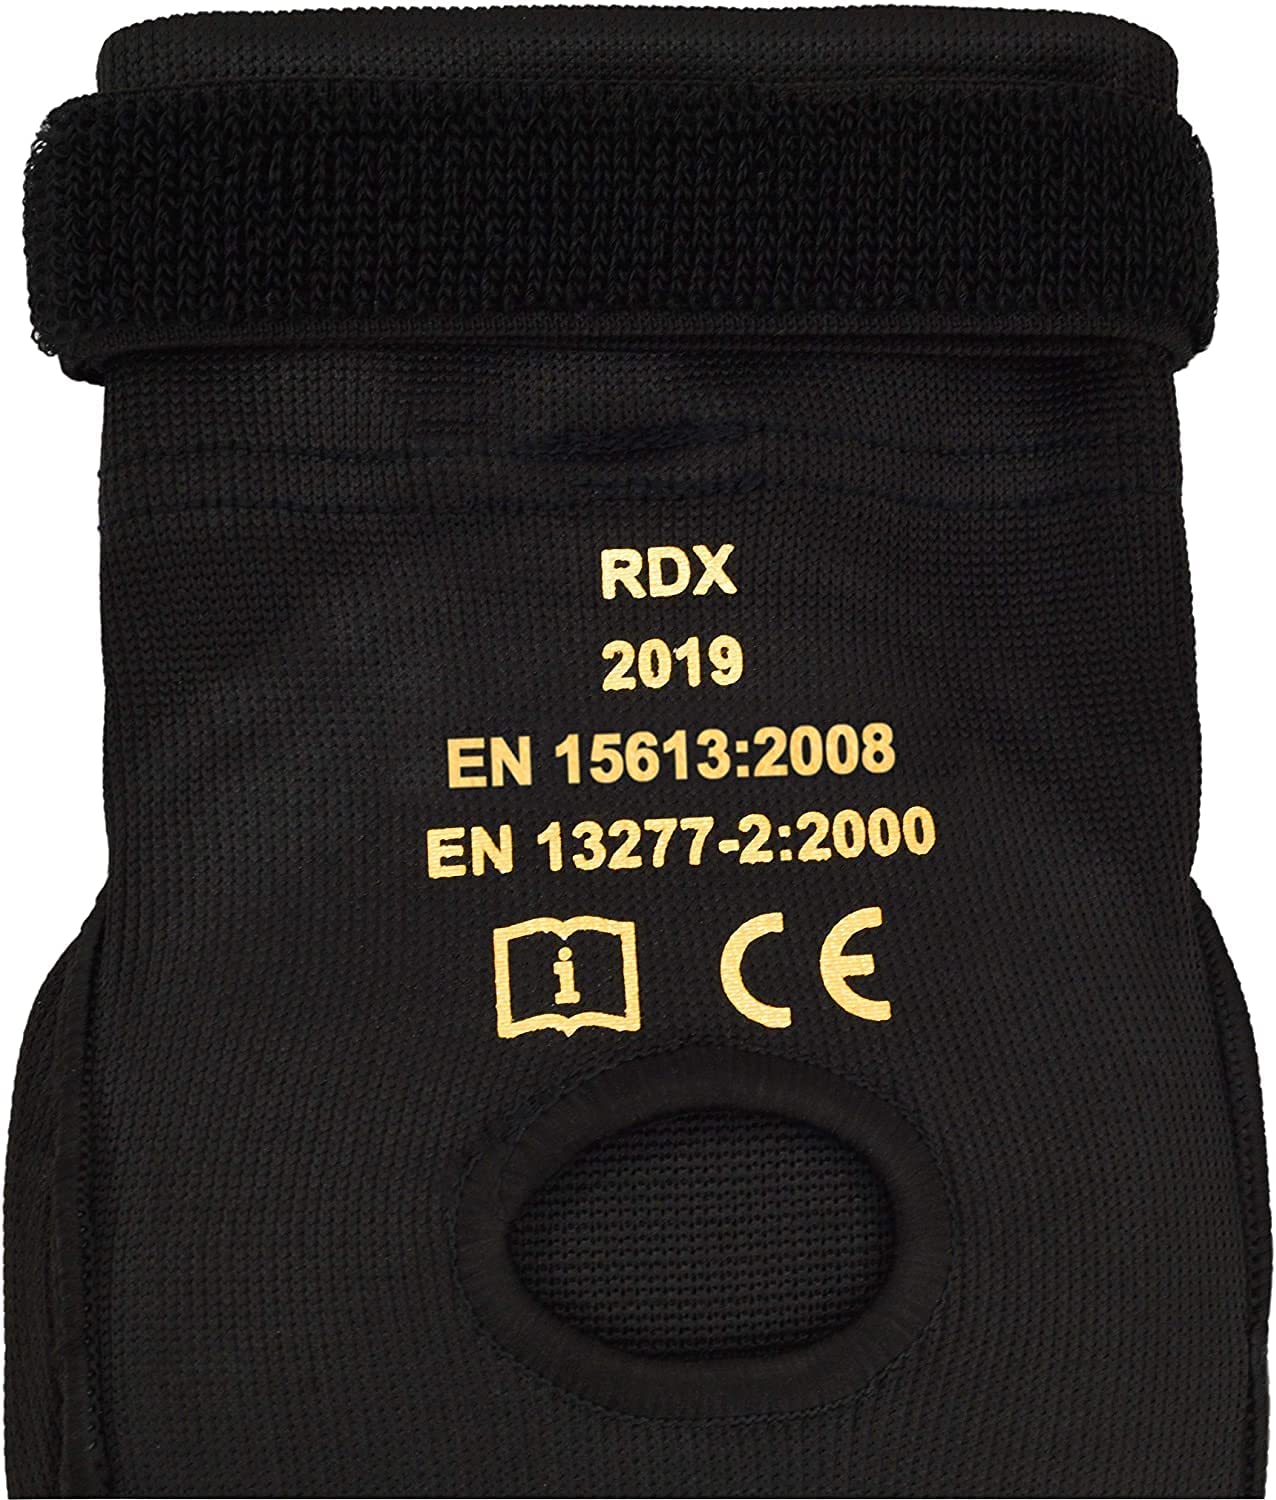 RDX Knee Support Brace Protector